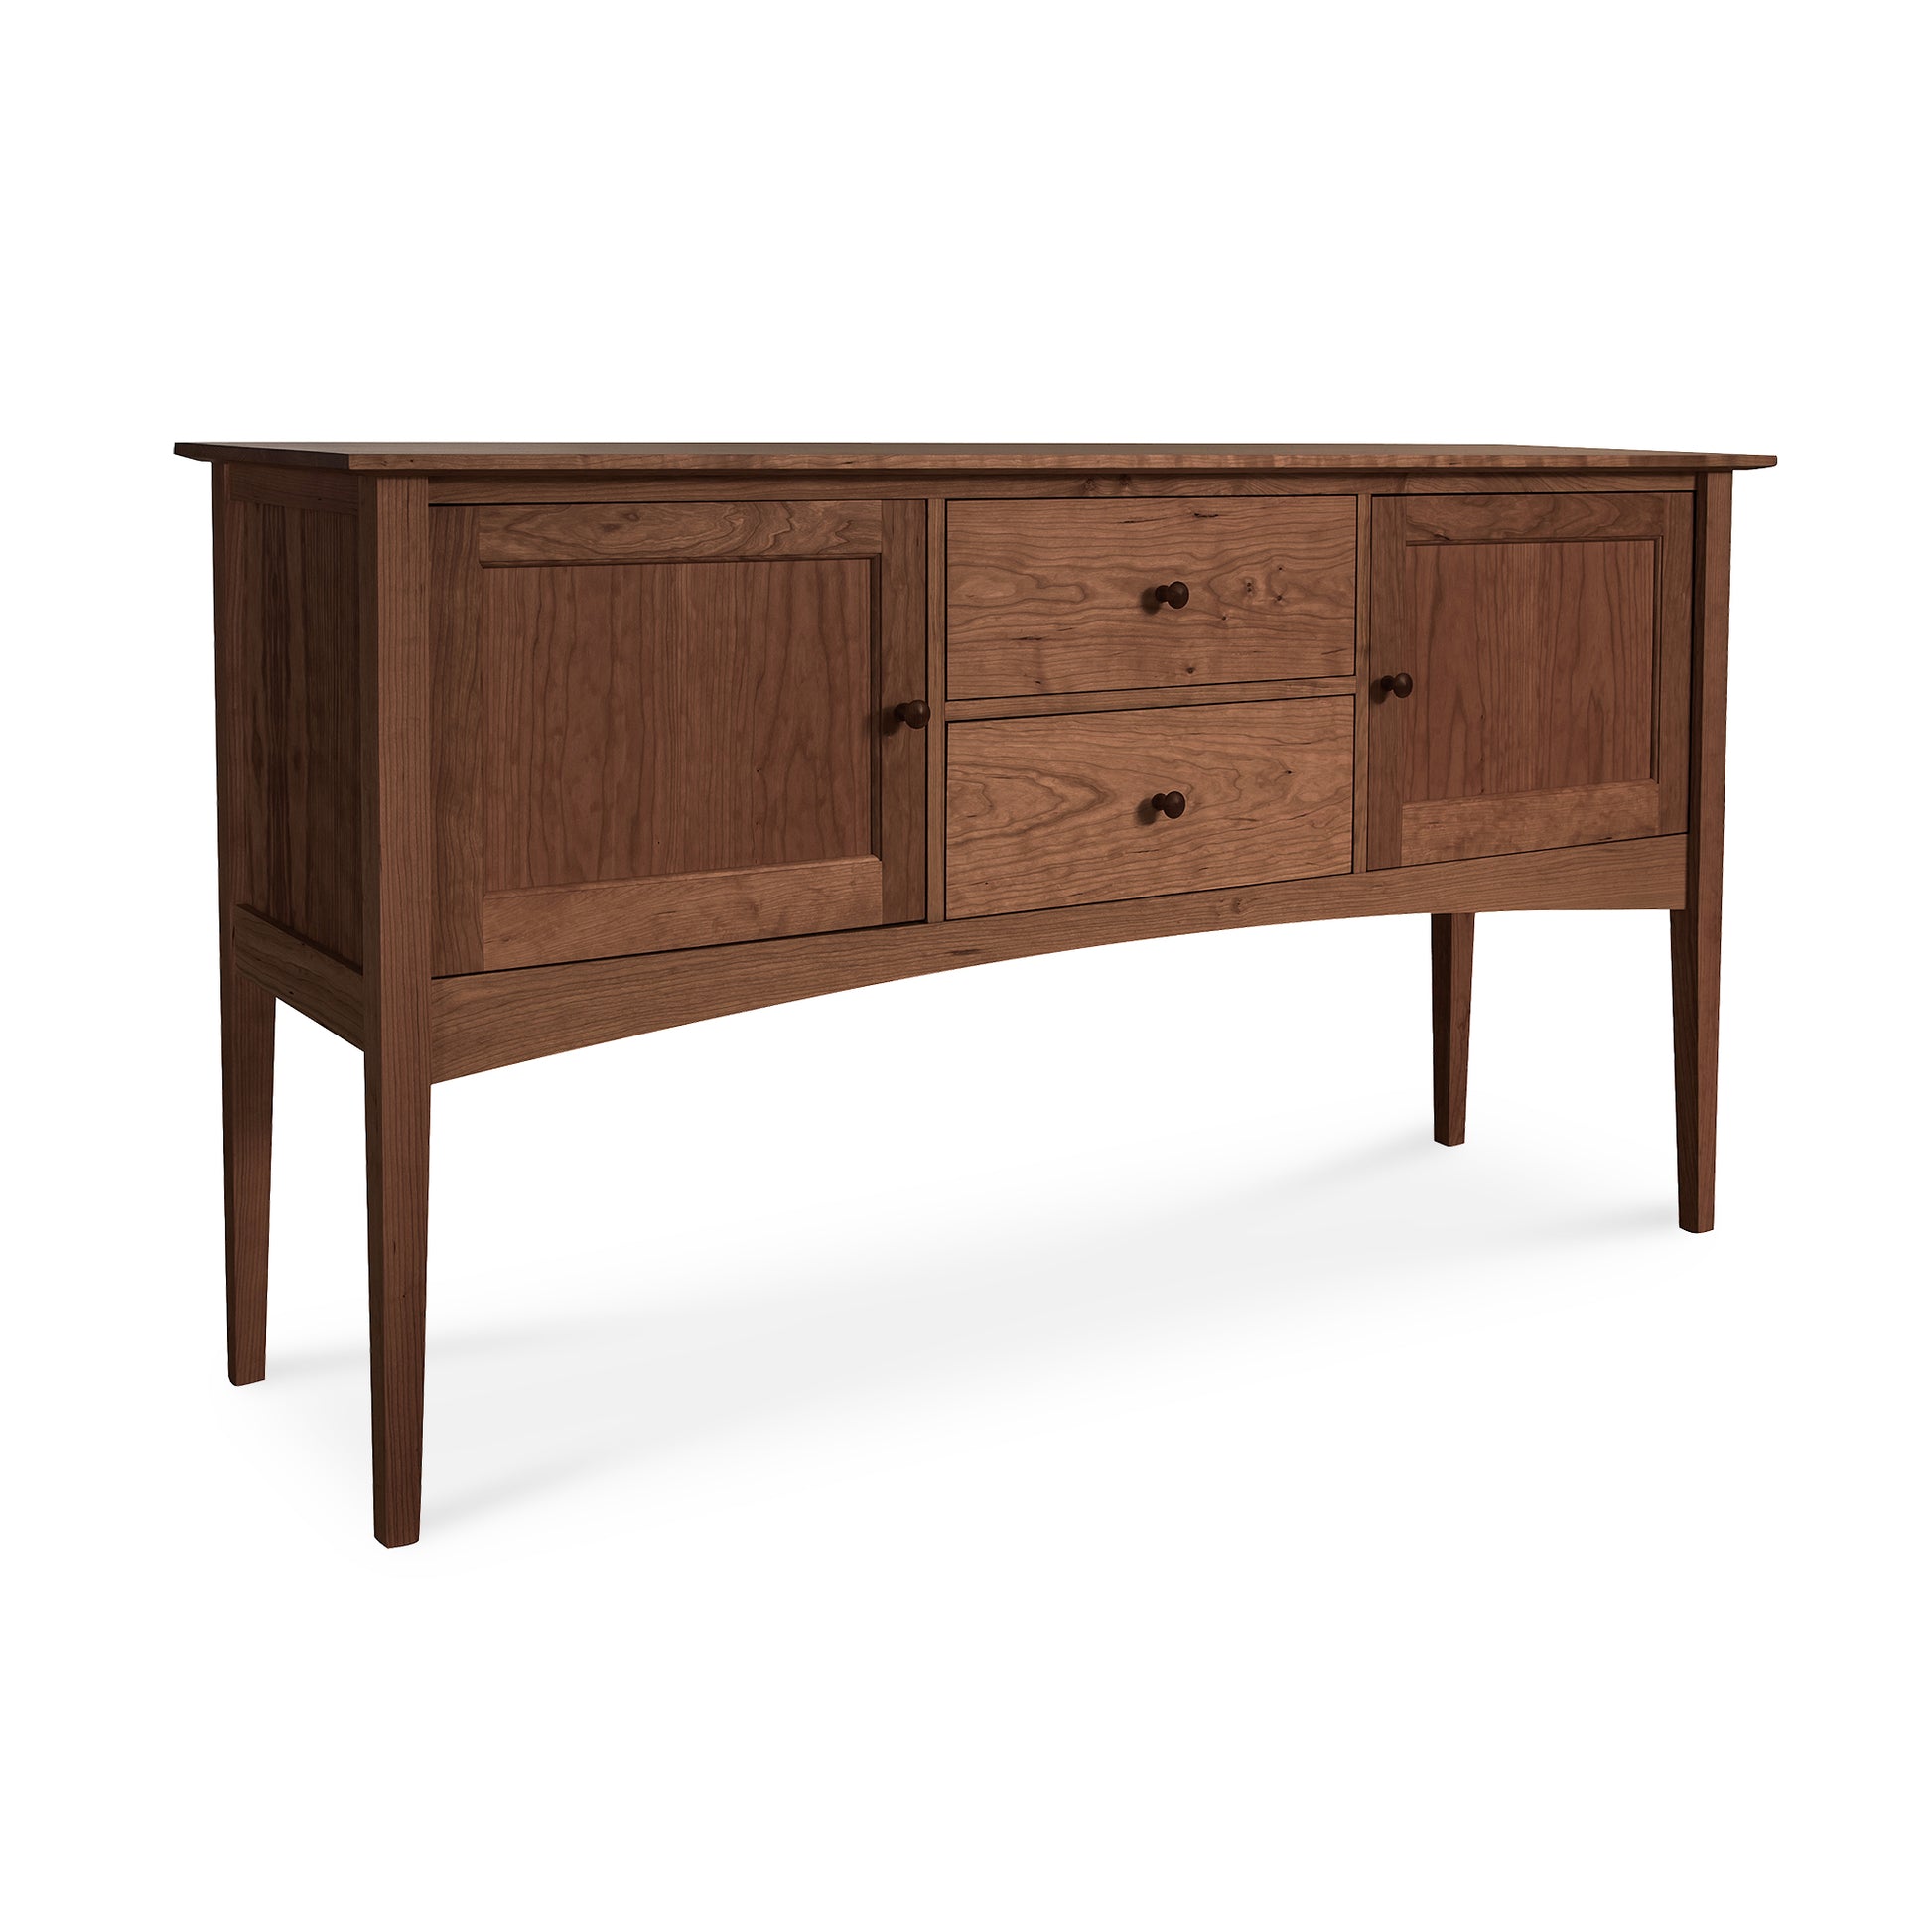 A American Shaker Huntboard with two cabinets and three central drawers, set on slender legs. The furniture features visible wood grain and round handles, styled in a minimalist Maple Corner Woodworks design.